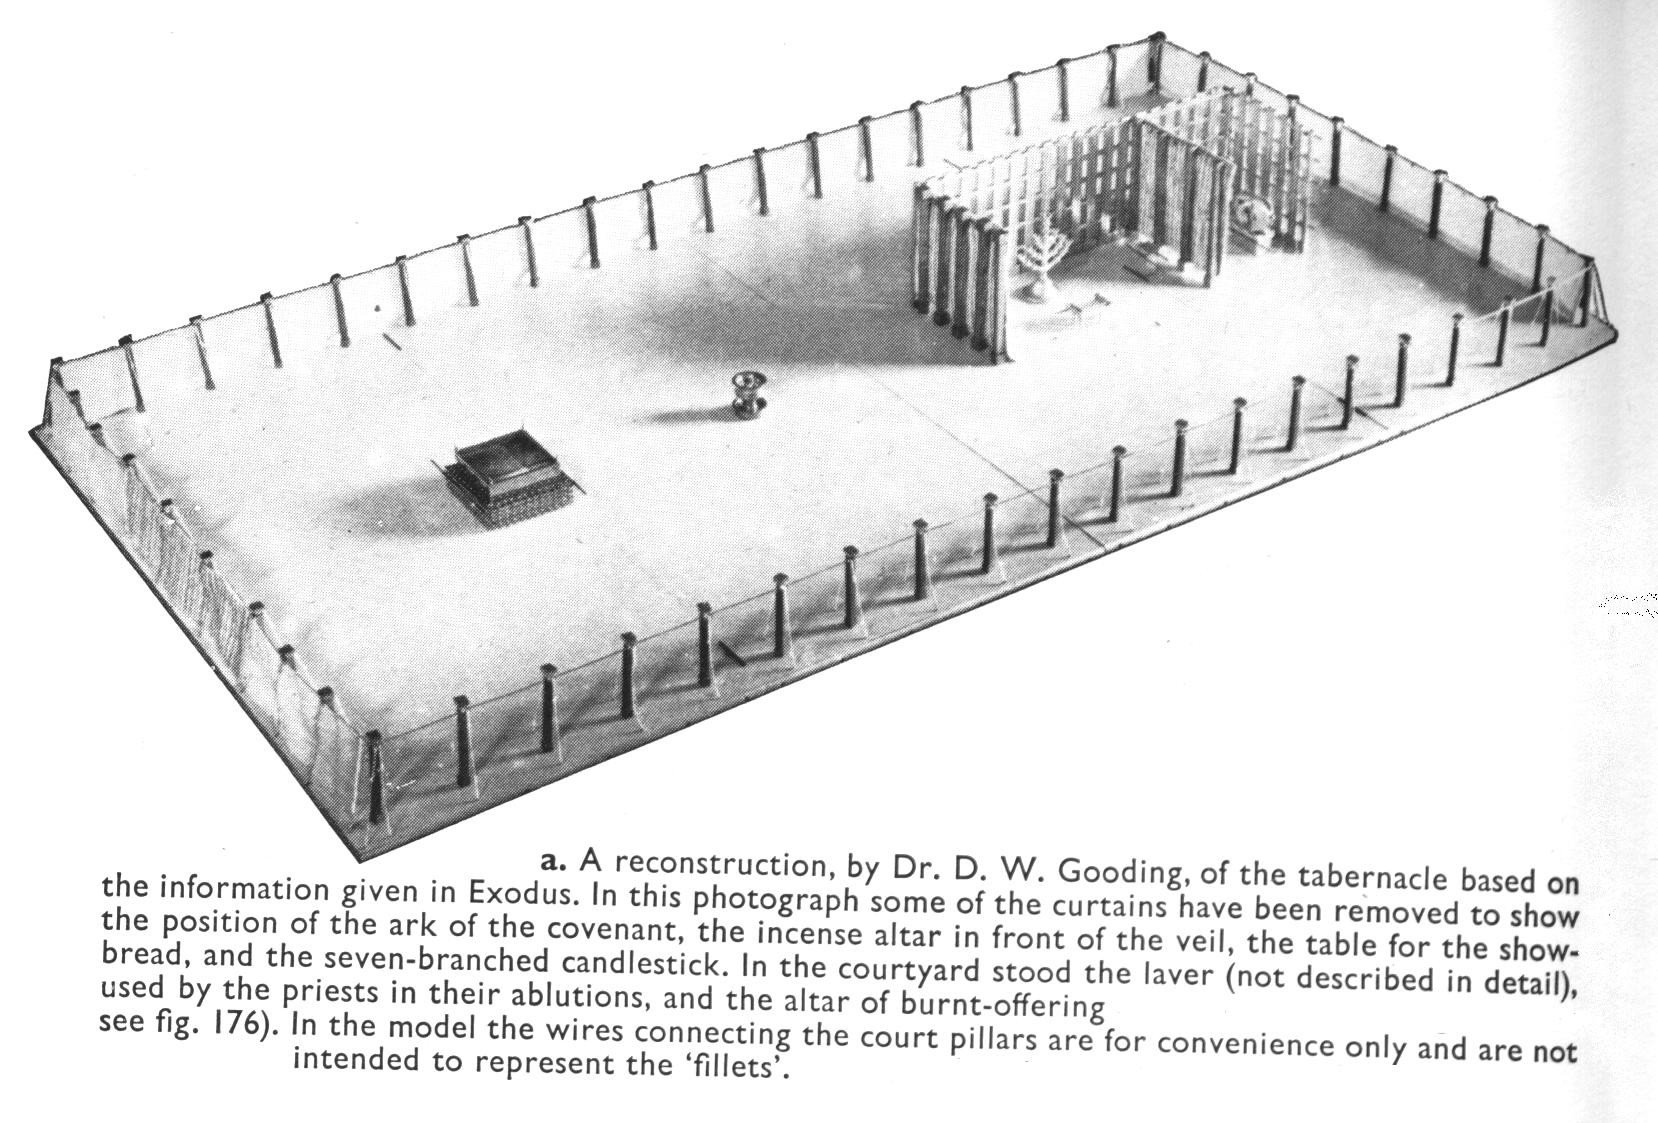 Reconstruction of the Tabernacle